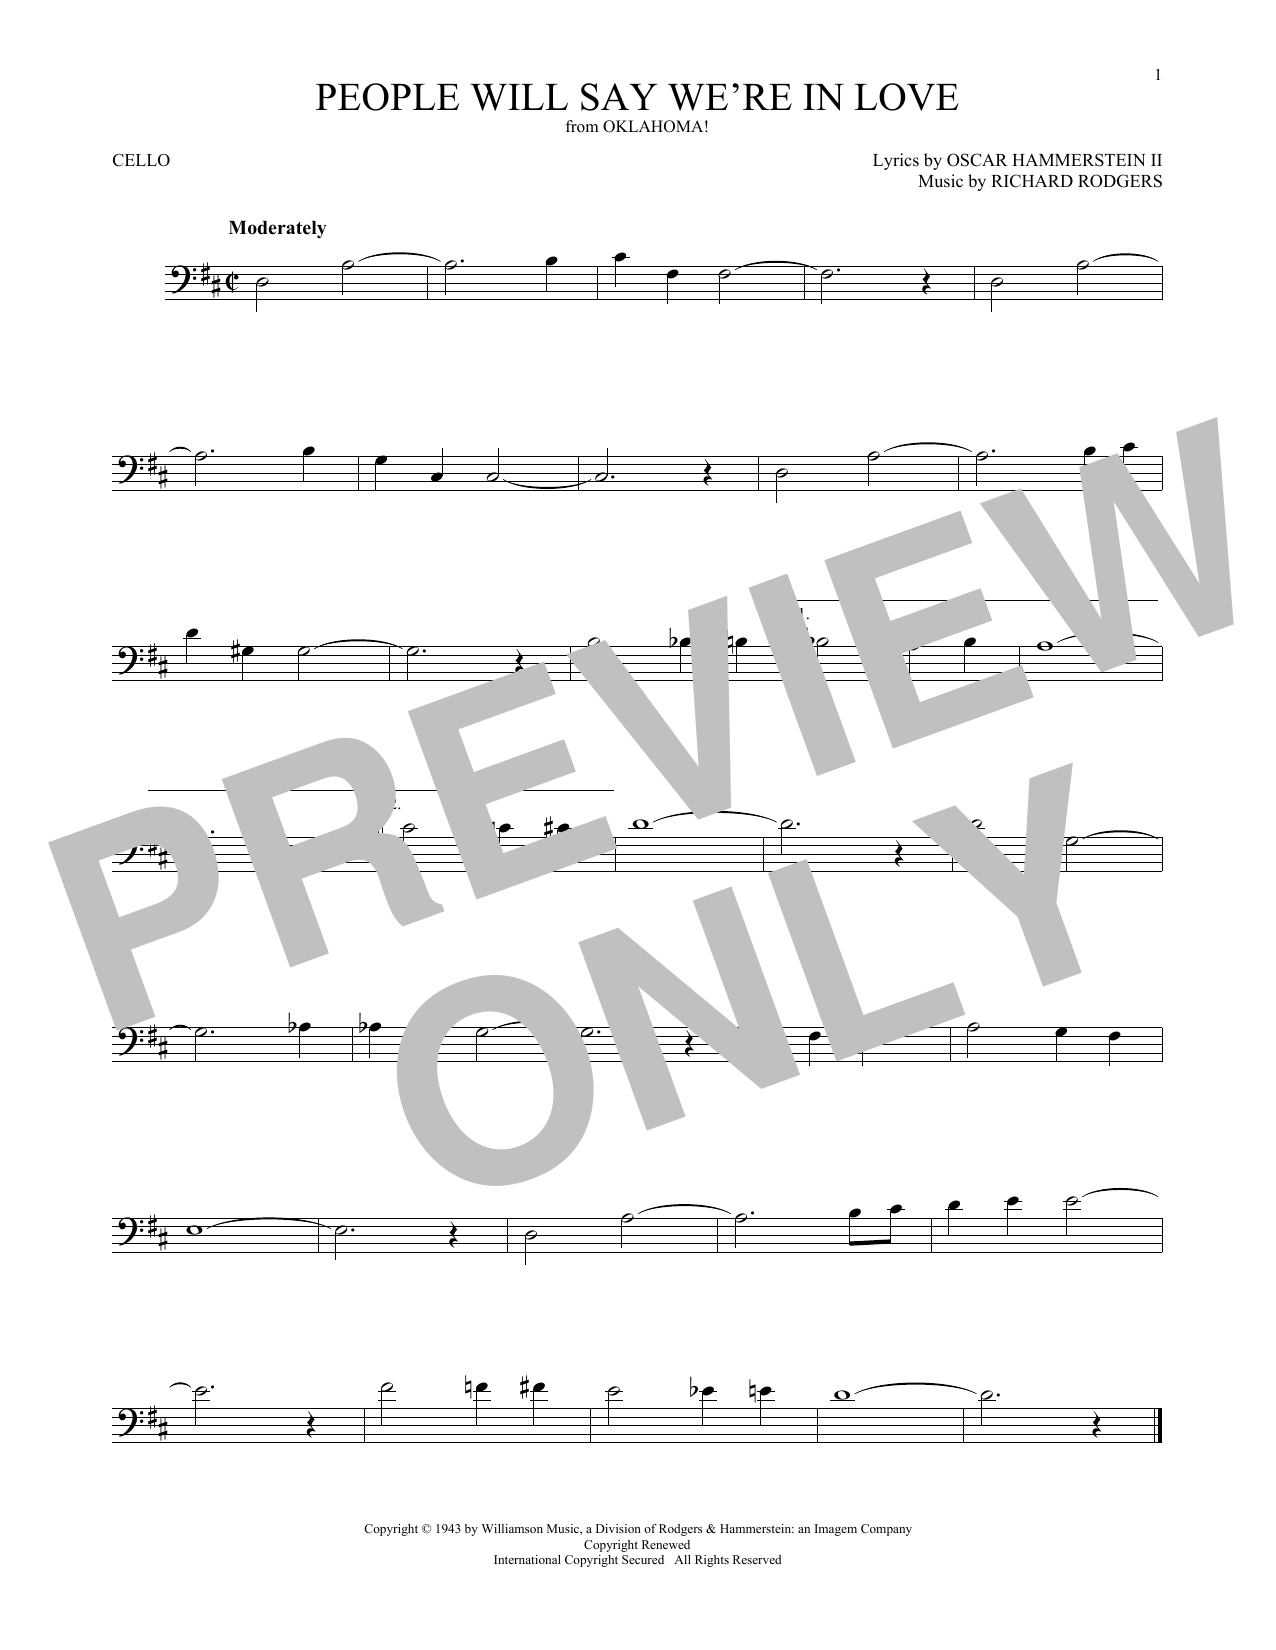 Download Rodgers & Hammerstein People Will Say We're In Love Sheet Music